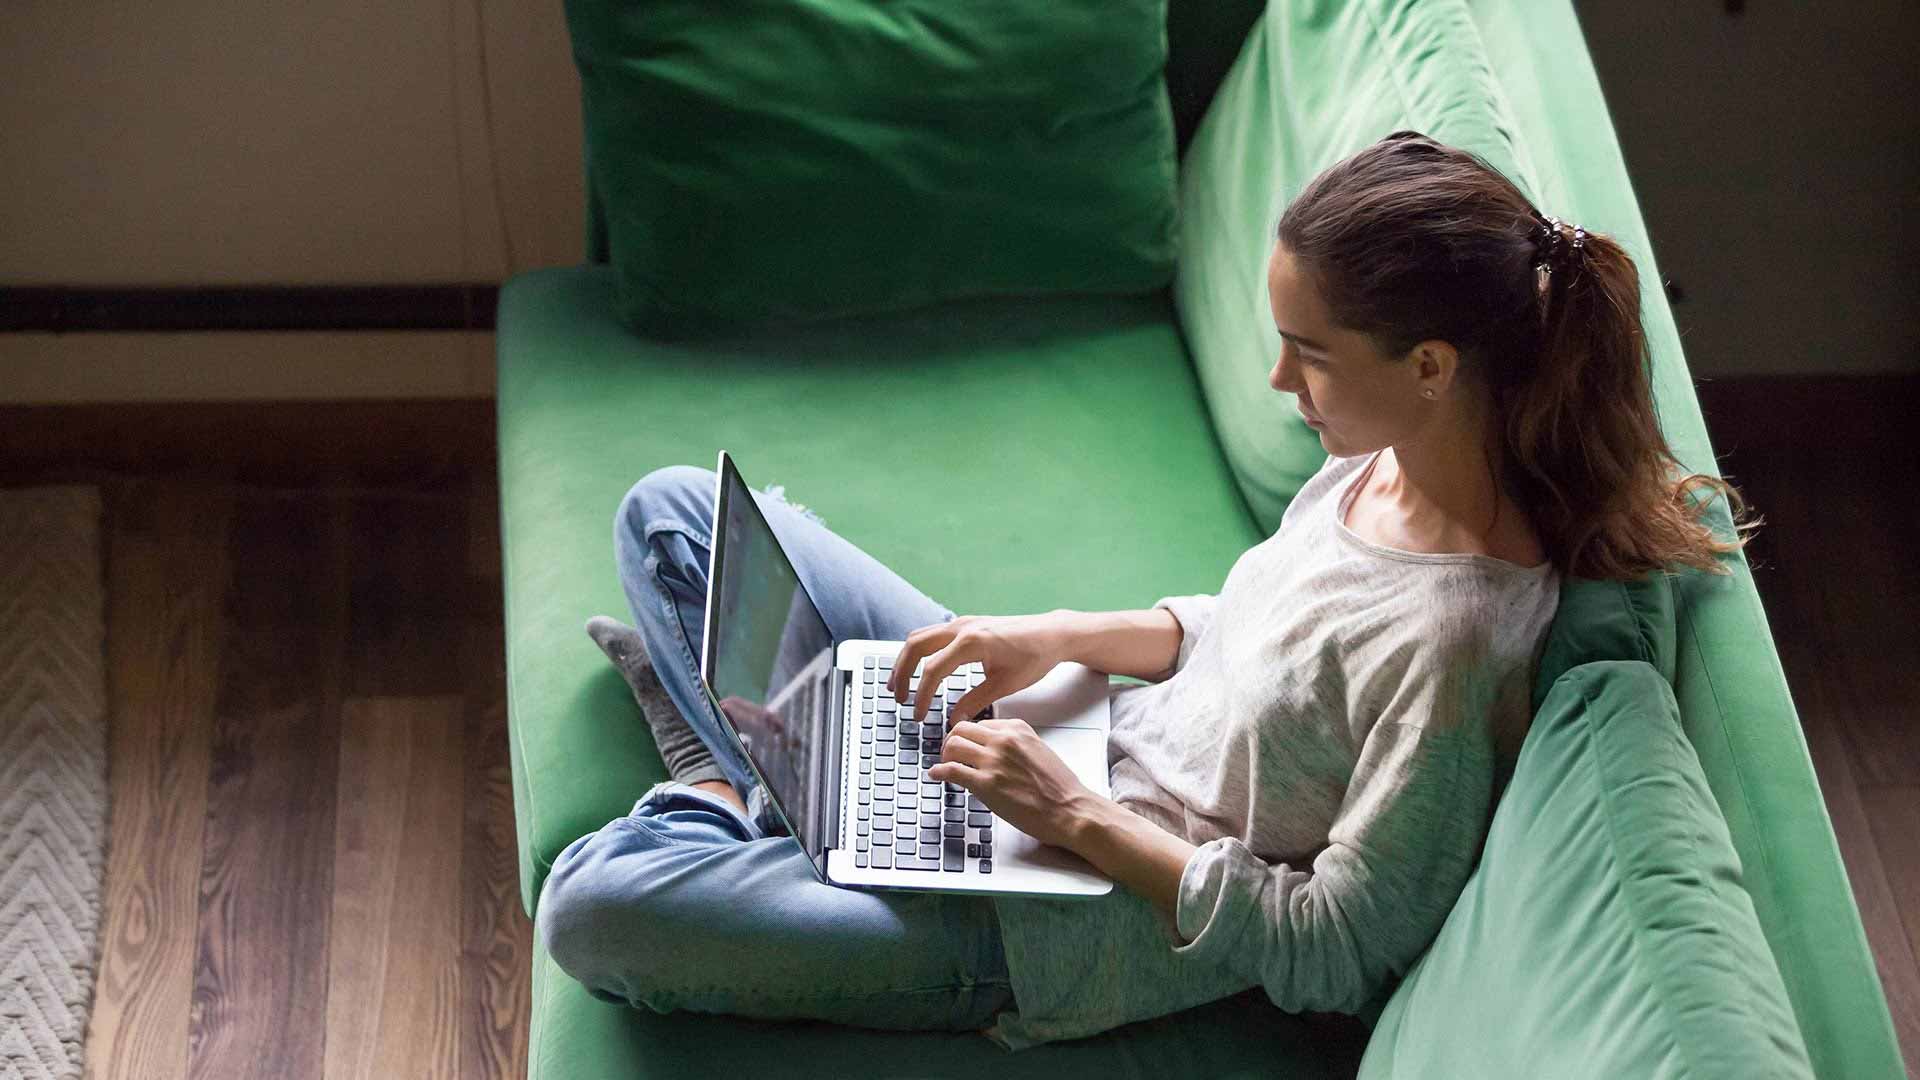 Student sits on a green couch and types away on her laptop.